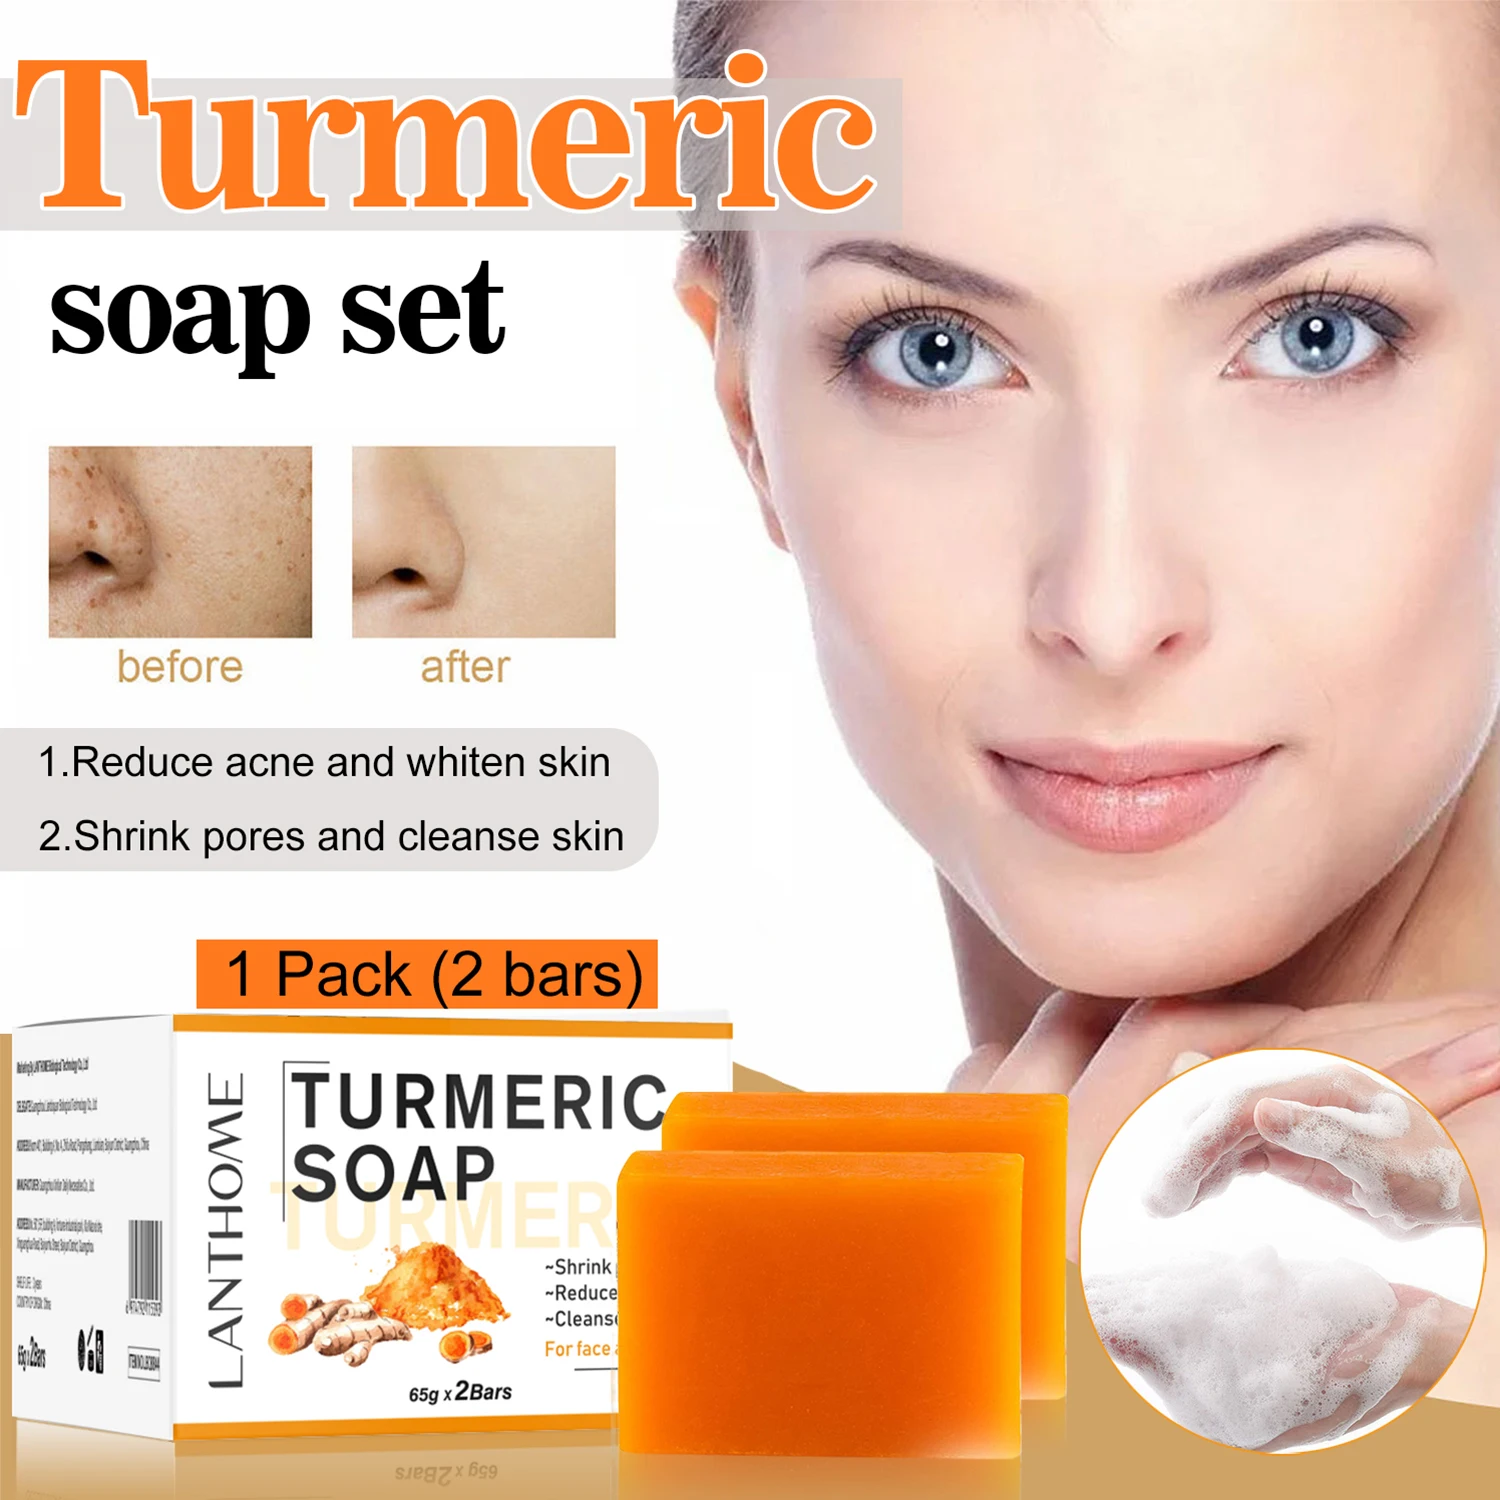 

130g Turmeric Whitening Soap Remove Acne Clean Oily Skin Natural Chinese Medicine Ingredients Body Care Anti Aging Handmade Soap